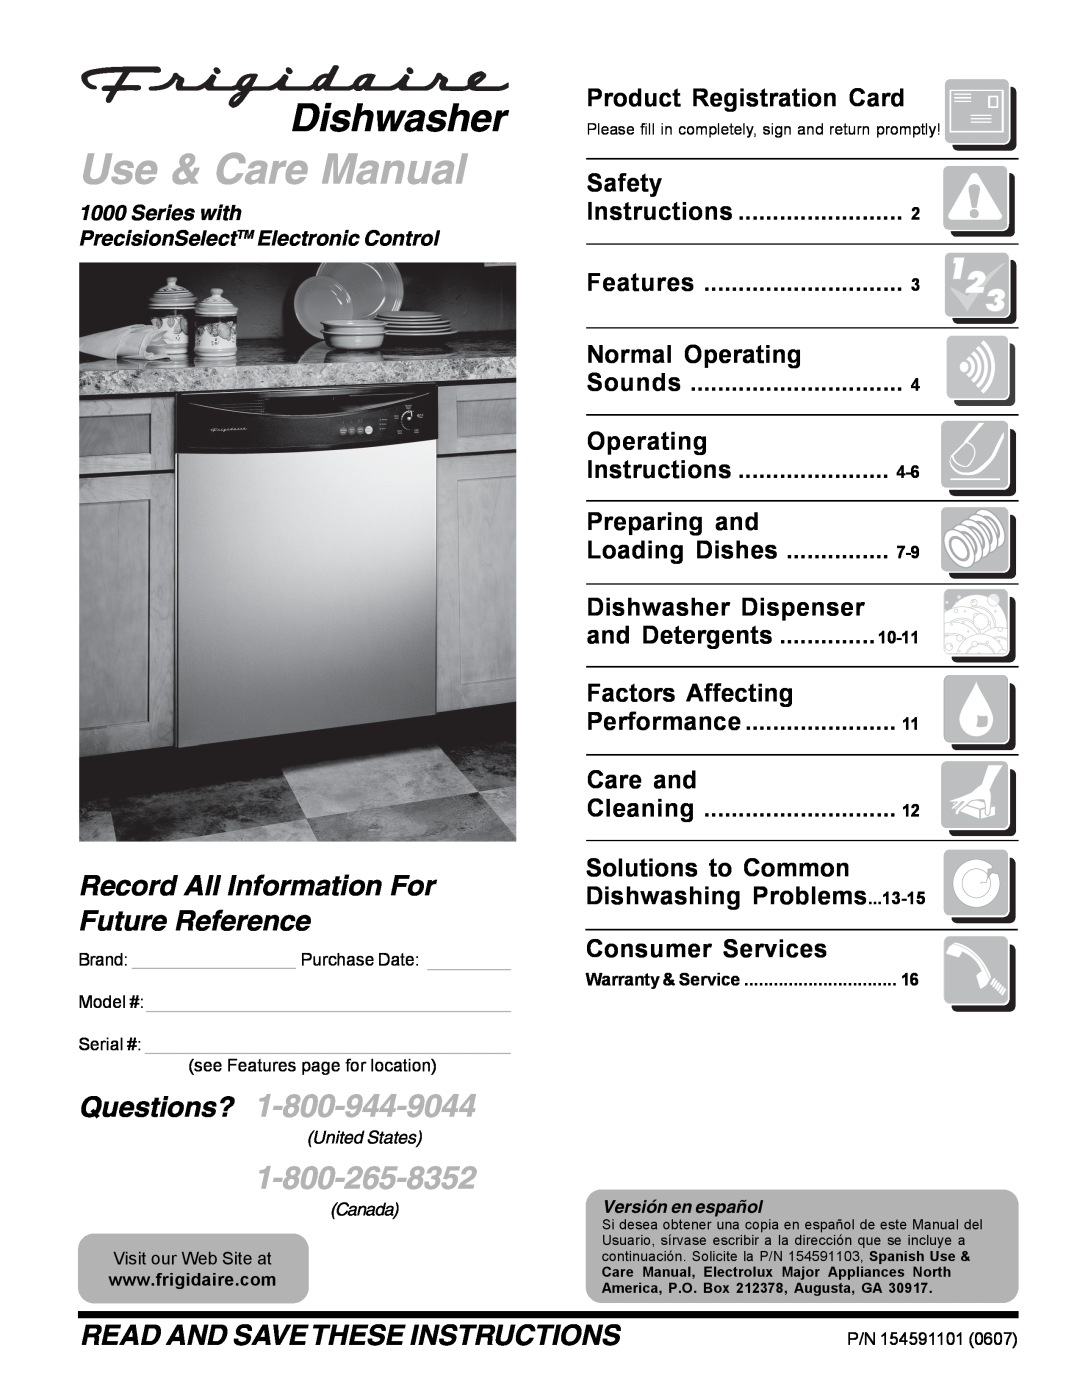 Frigidaire 1000 Series warranty Product Registration Card, Safety, Normal Operating, Preparing and, Dishwasher Dispenser 